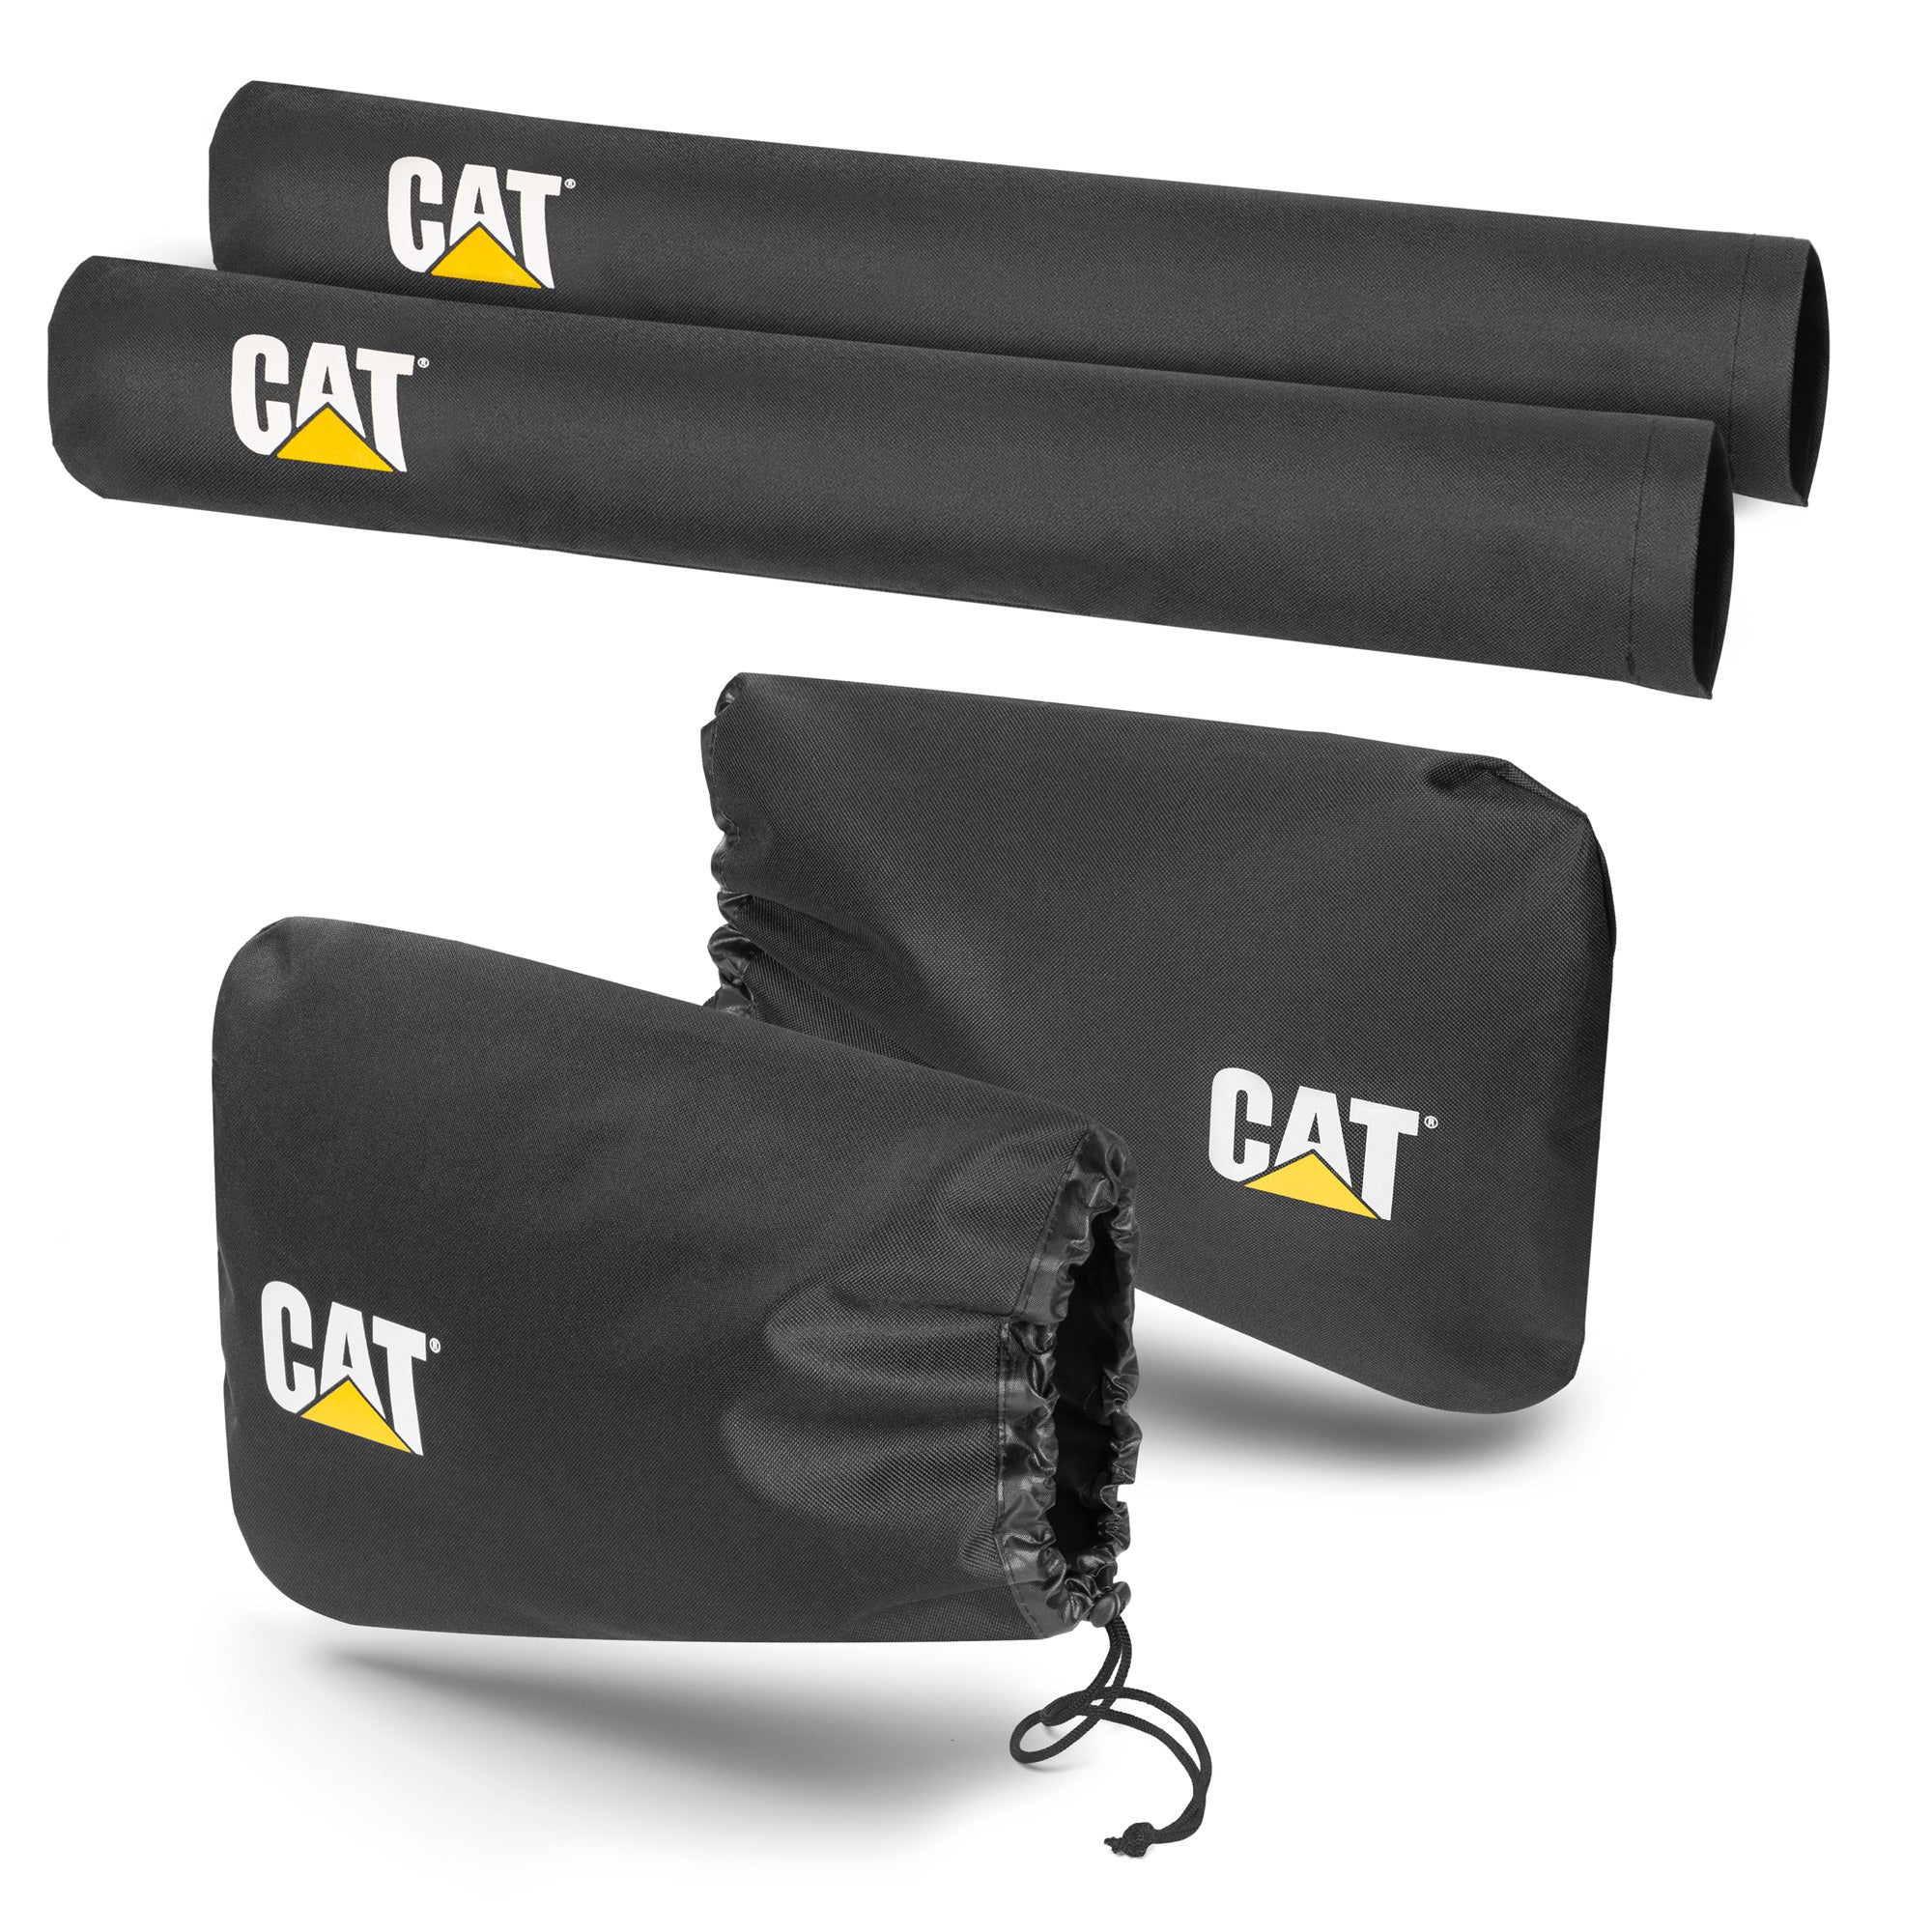 Cat® Side Window Covers and Windshield Wiper Snow Covers for Car Truck Van SUV, Full Set for 2 Side Windows and 2 Wiper Blades, Protects Against Freezing Frost Ice & Snow, Black (CAWA-204-BK)